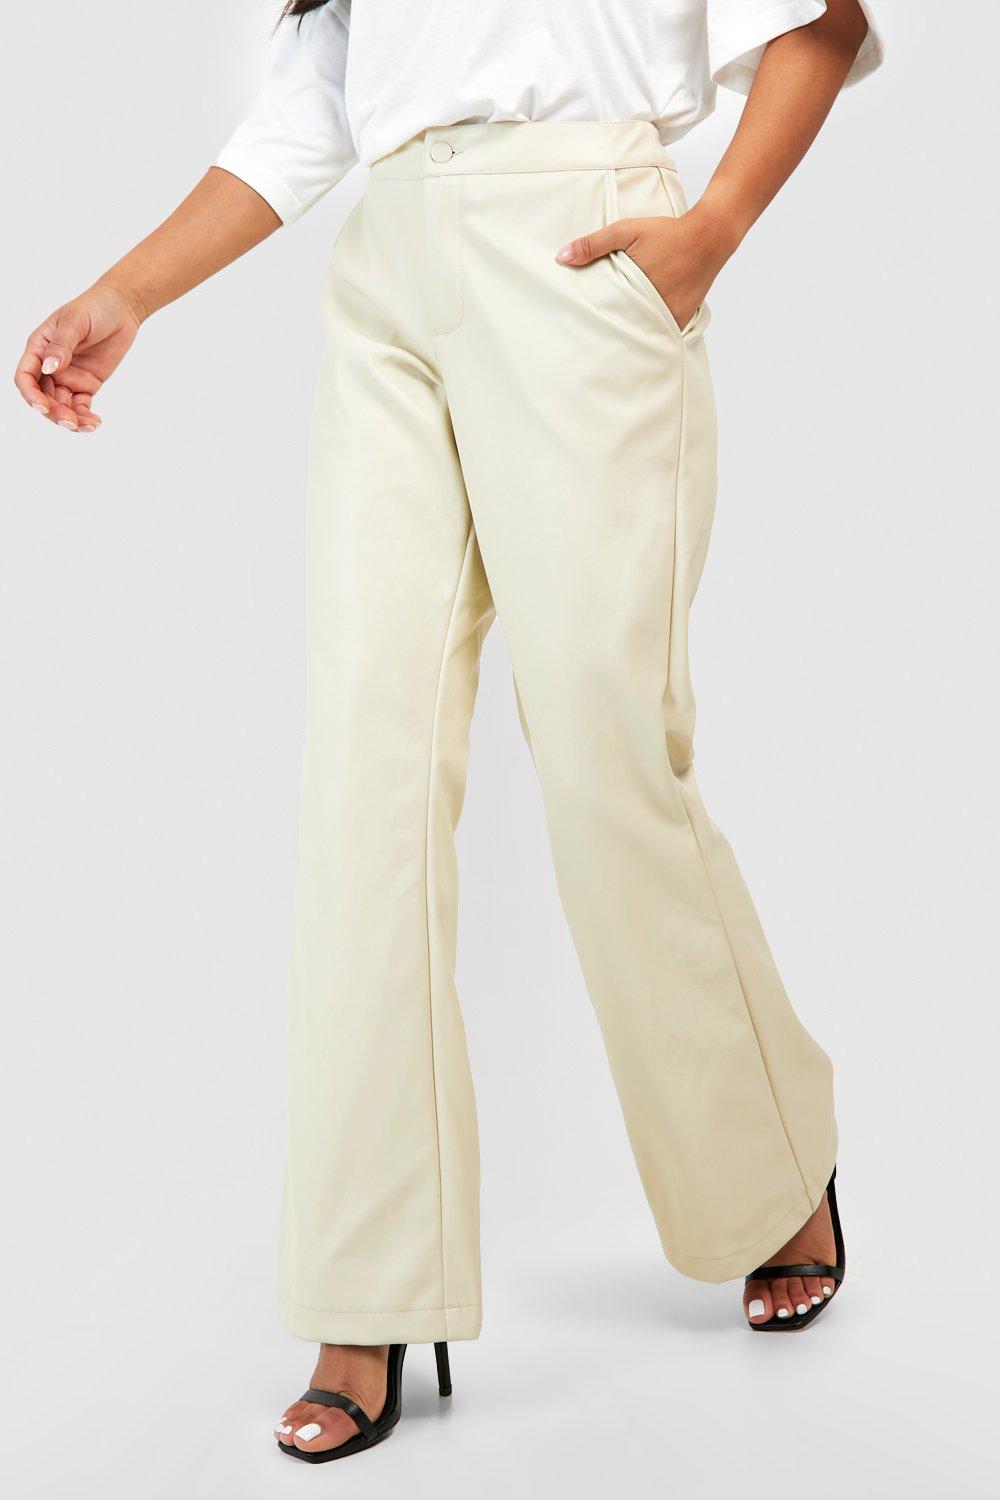 Petite Faux Leather High Waisted Flared Pants